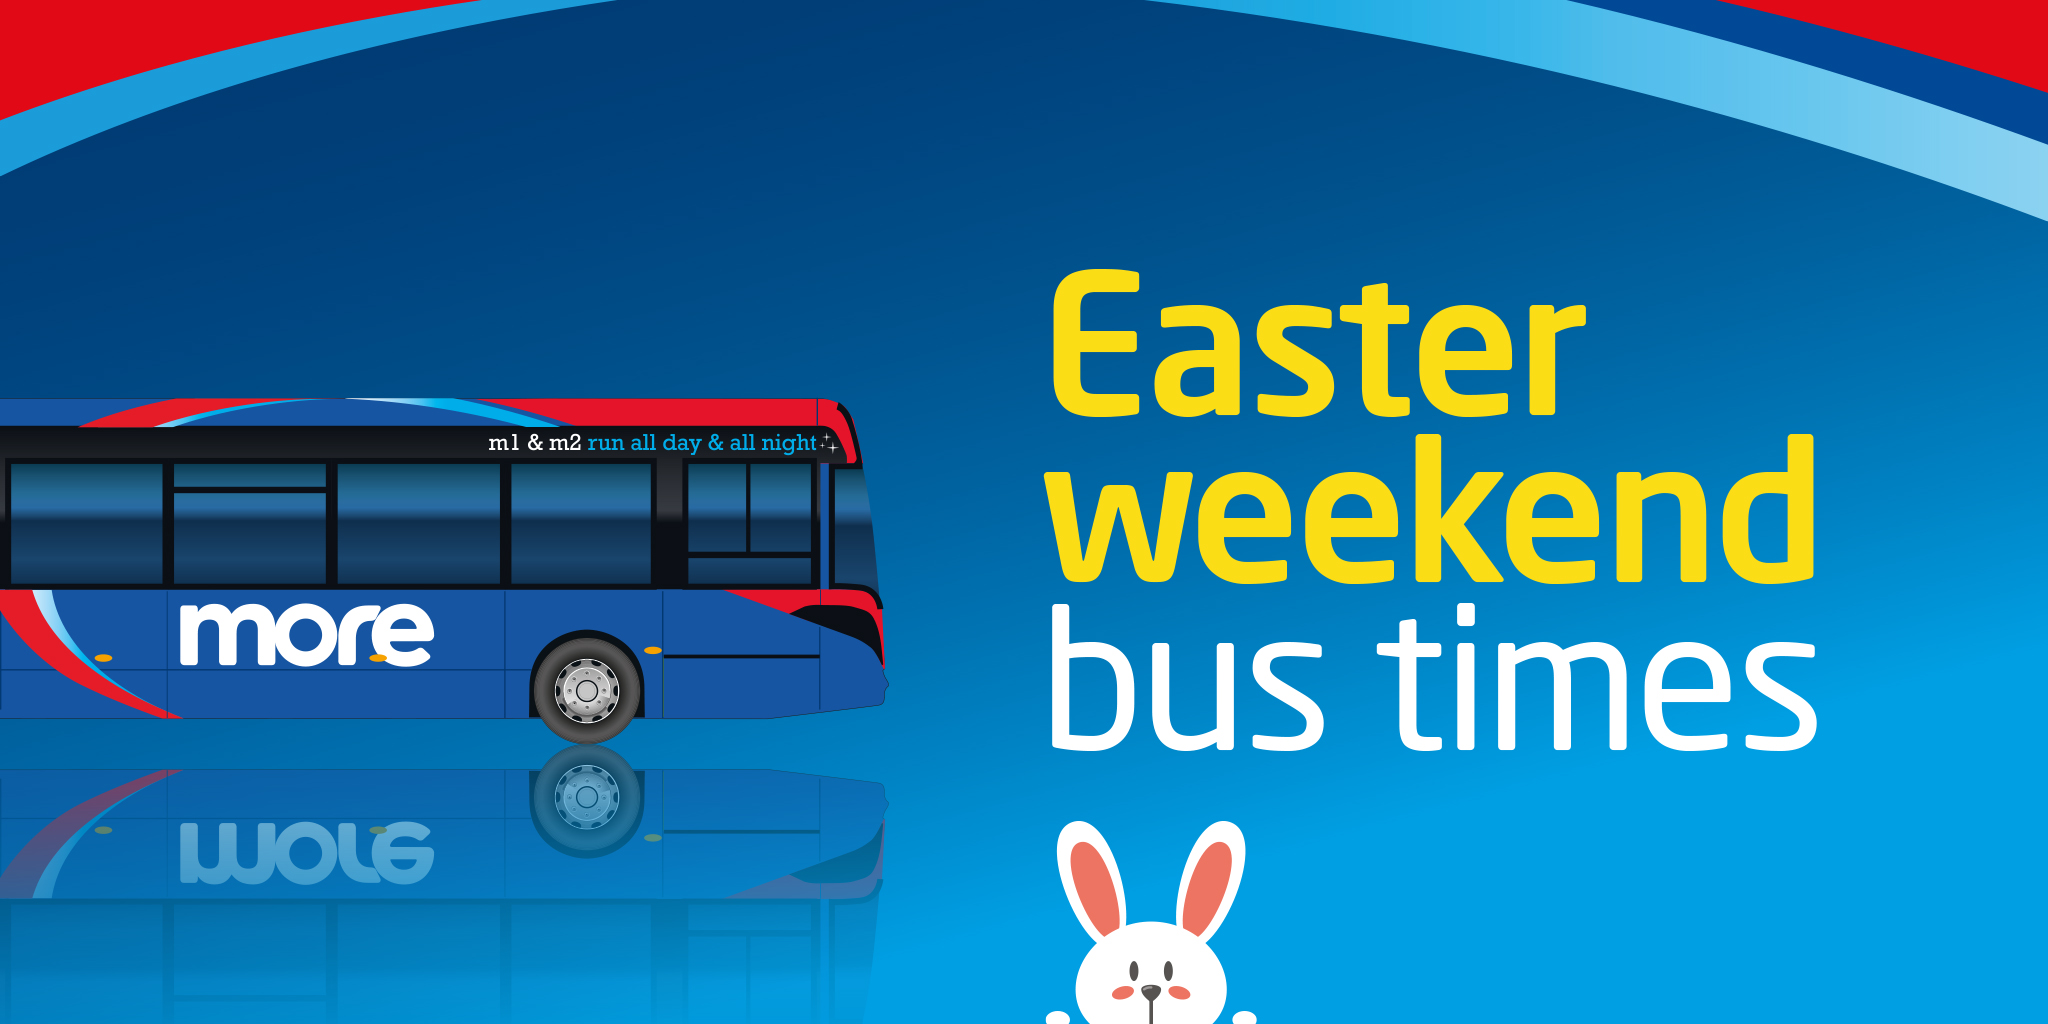 Easter Bank Holiday bus times morebus